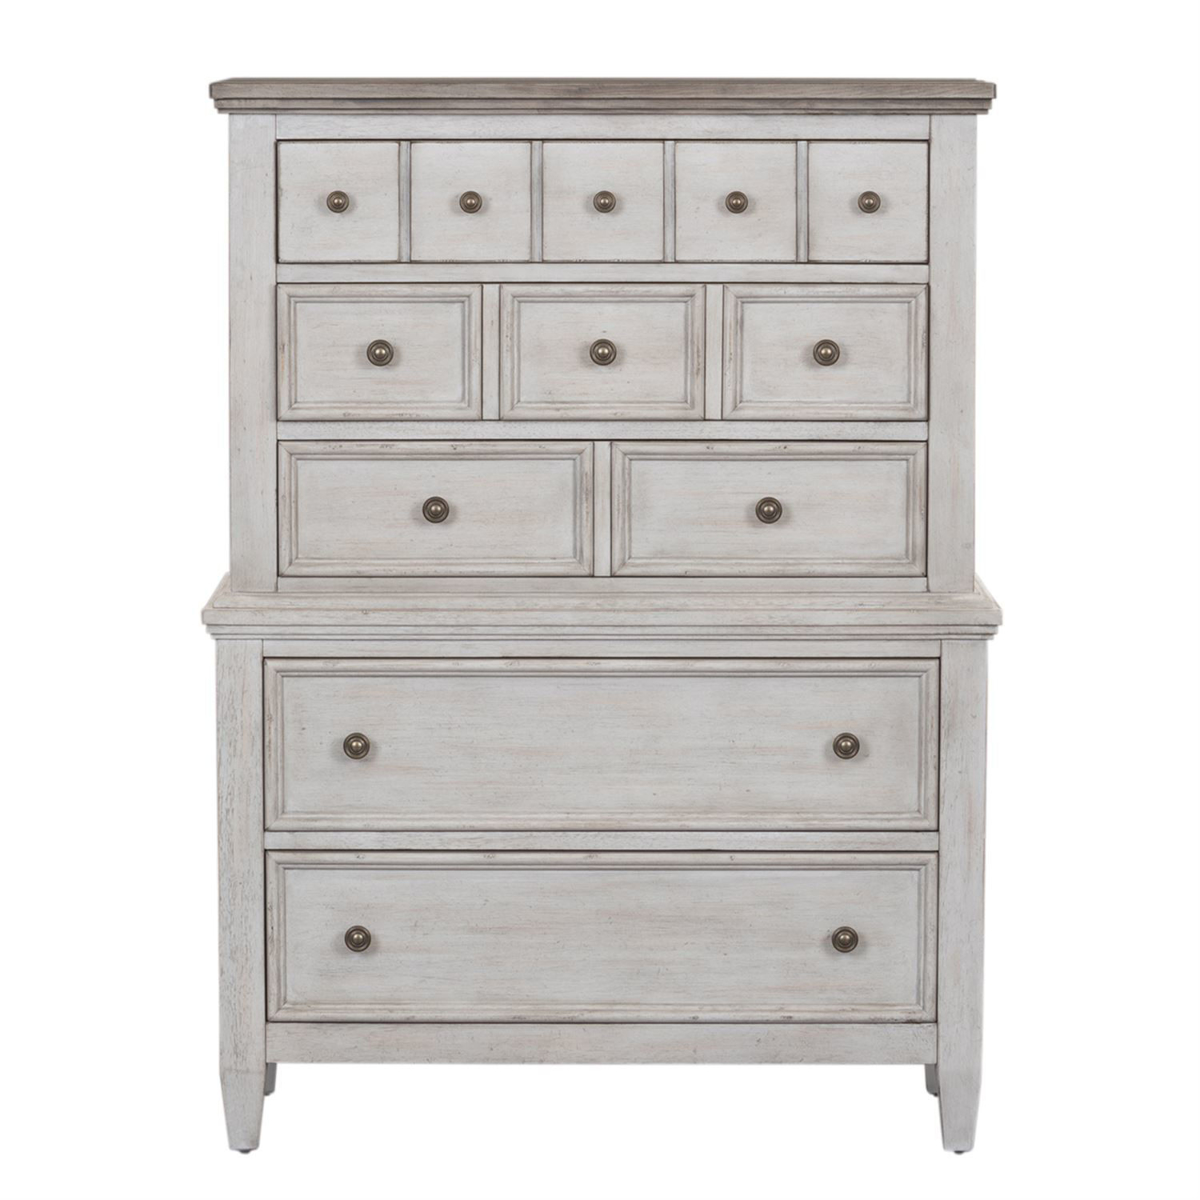 Picture of Piazza 5 Drawer Chest